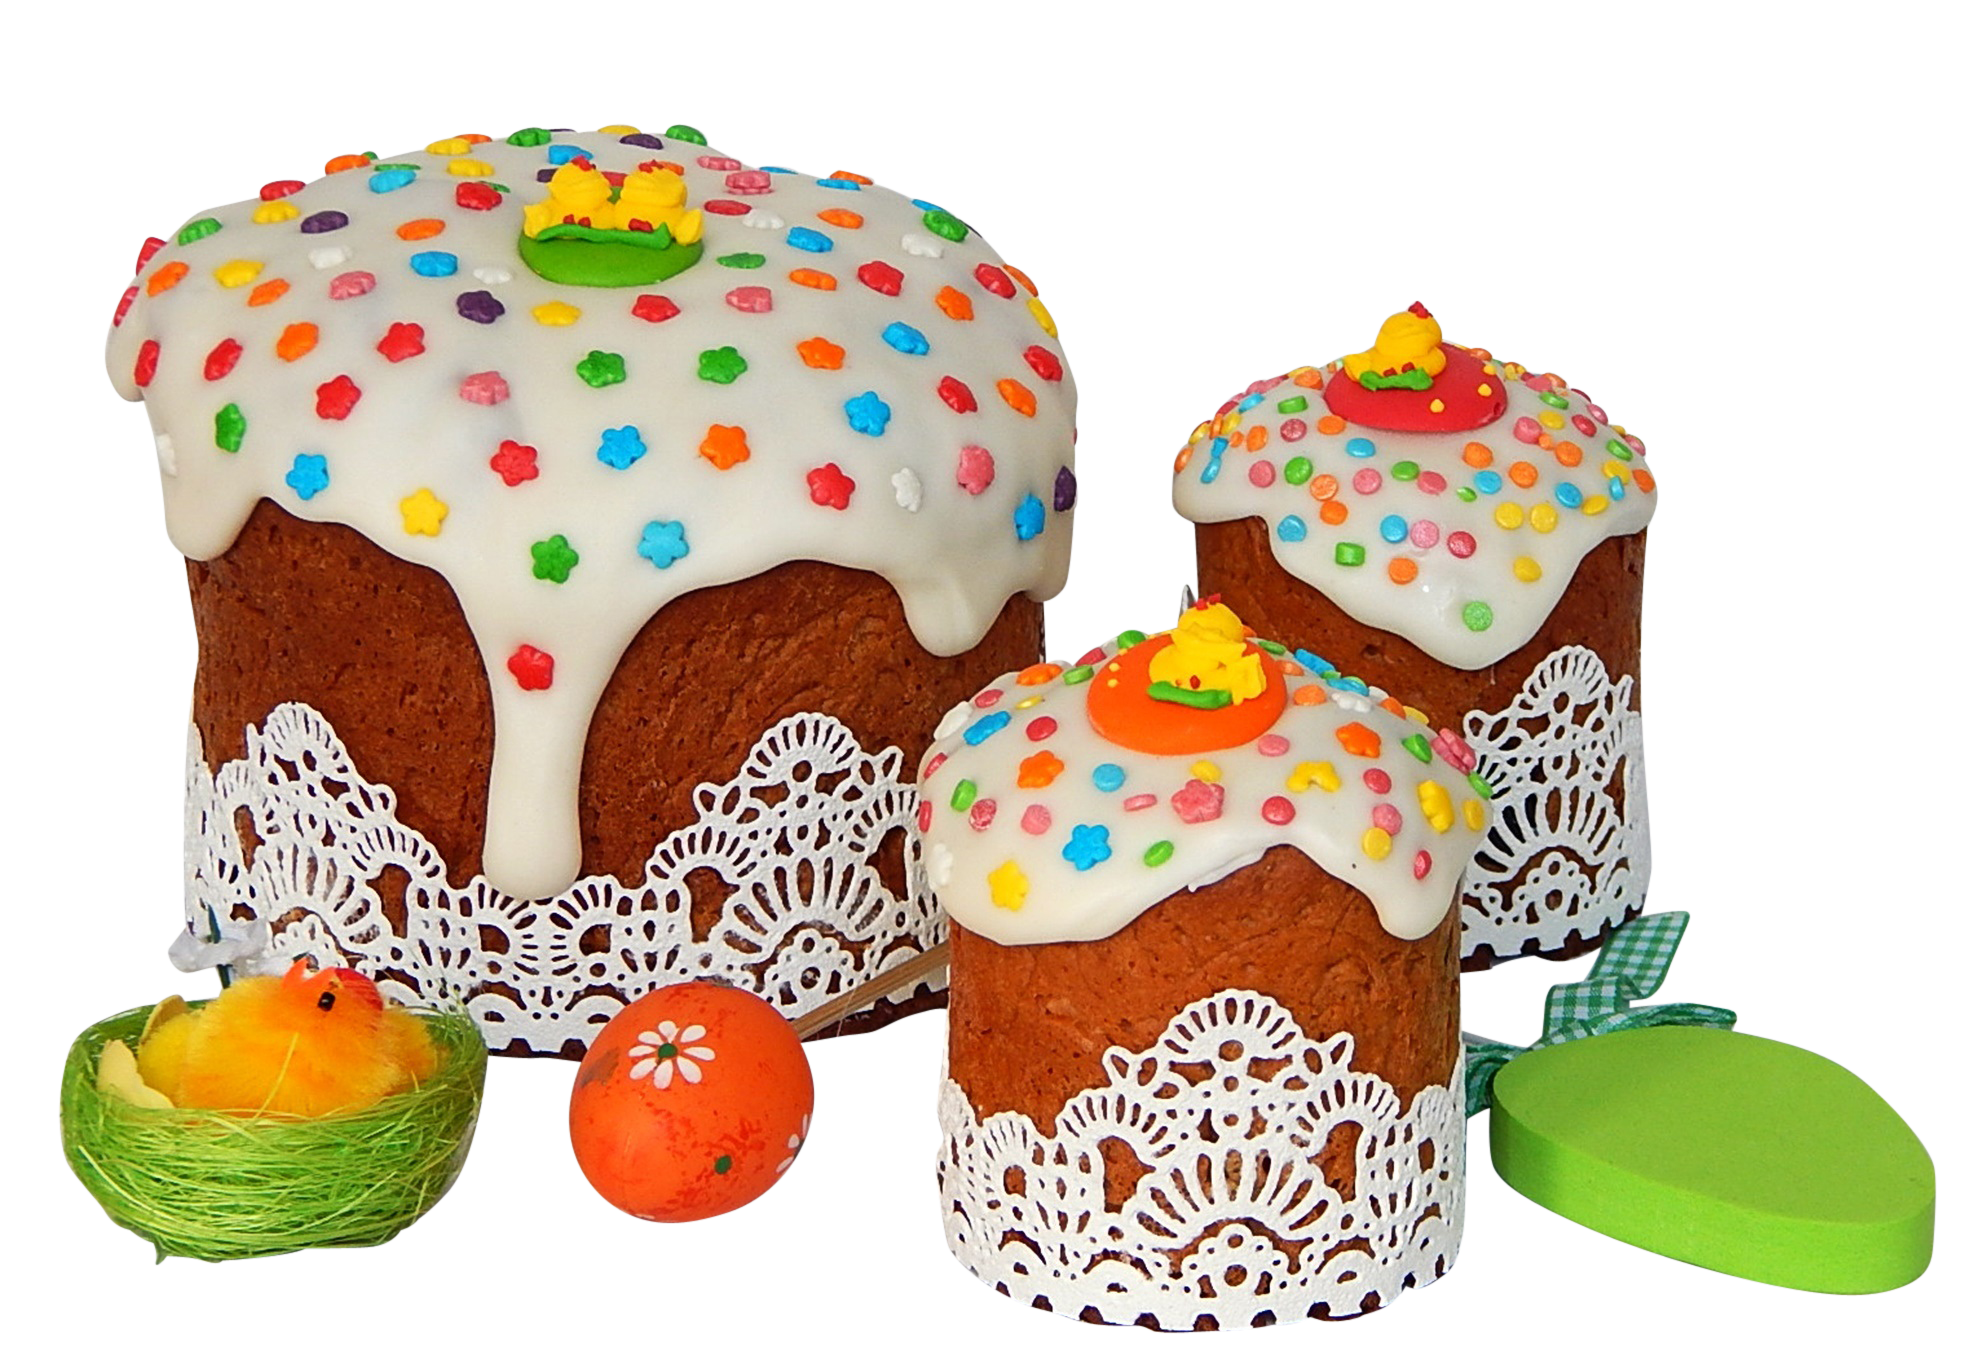 A Group Of Cakes With White Frosting And Colorful Eggs